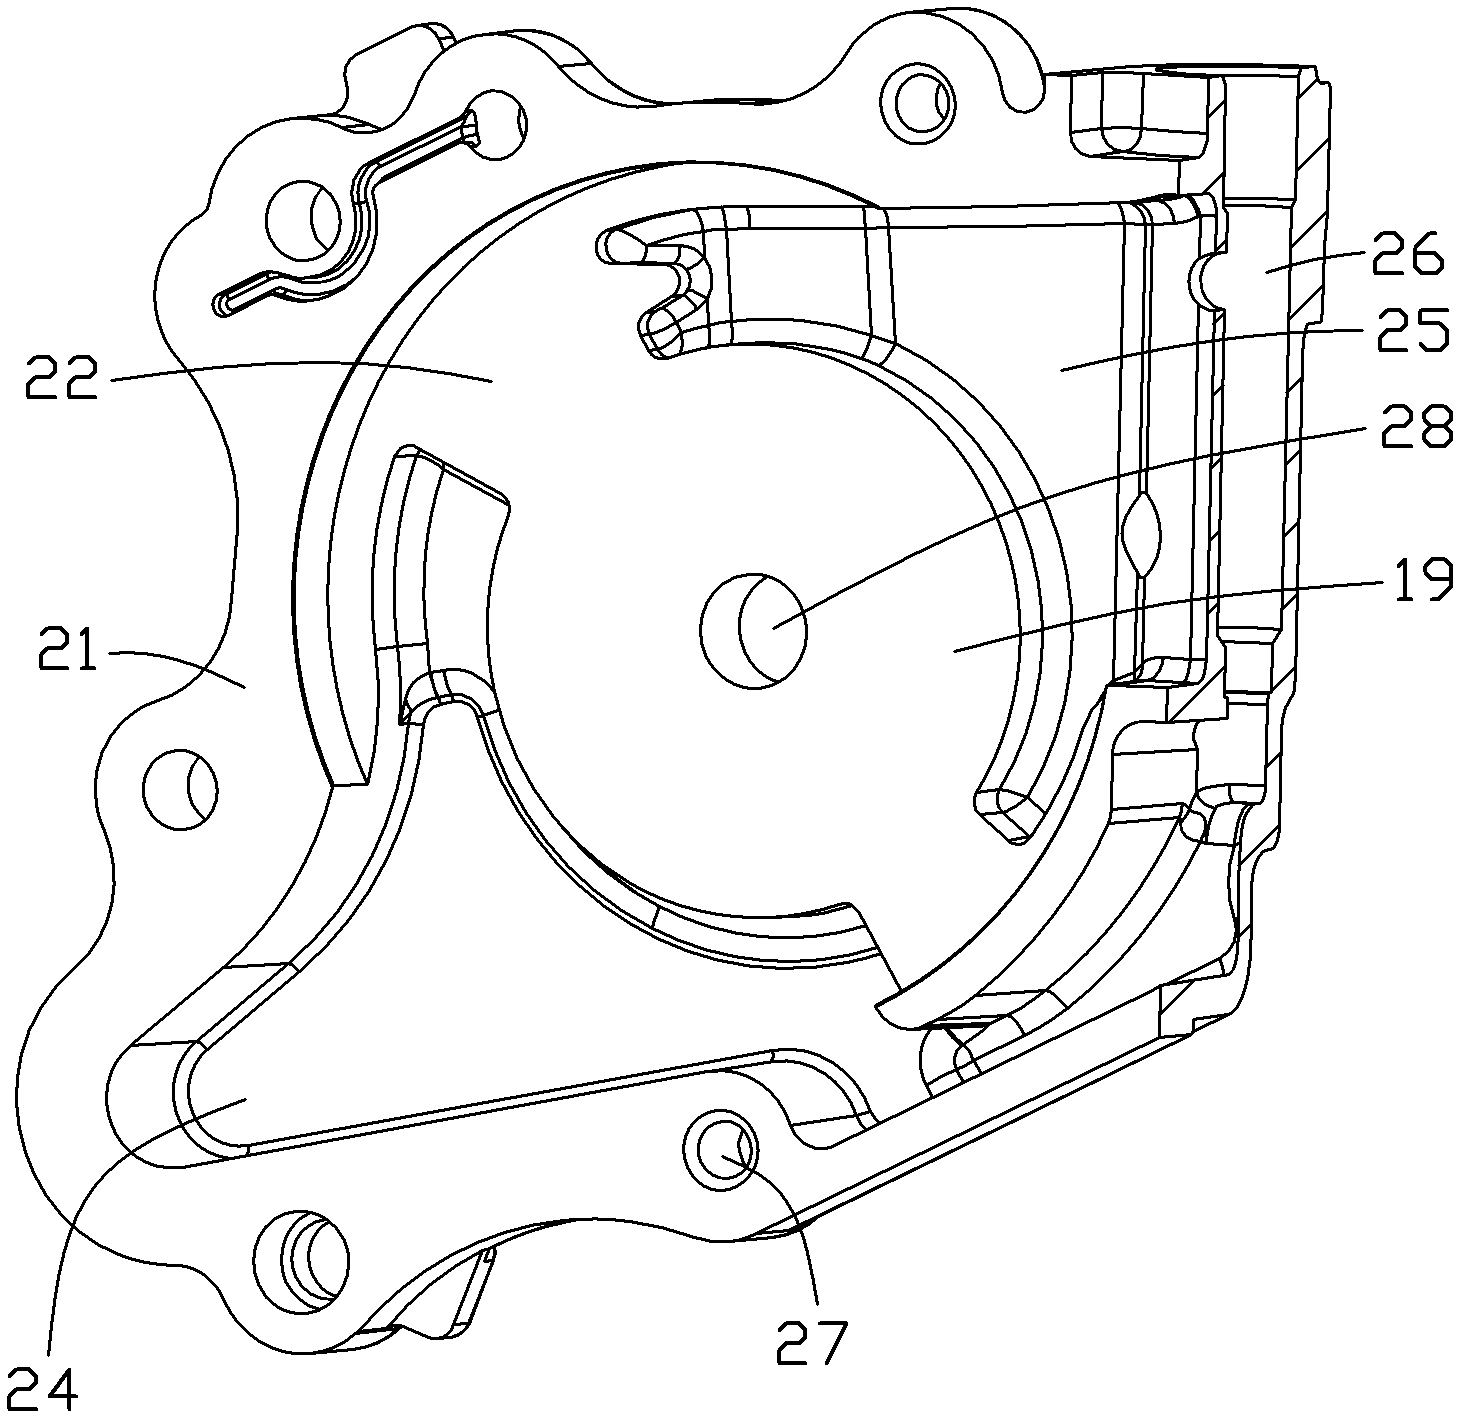 Variable displacement rotor oil pump